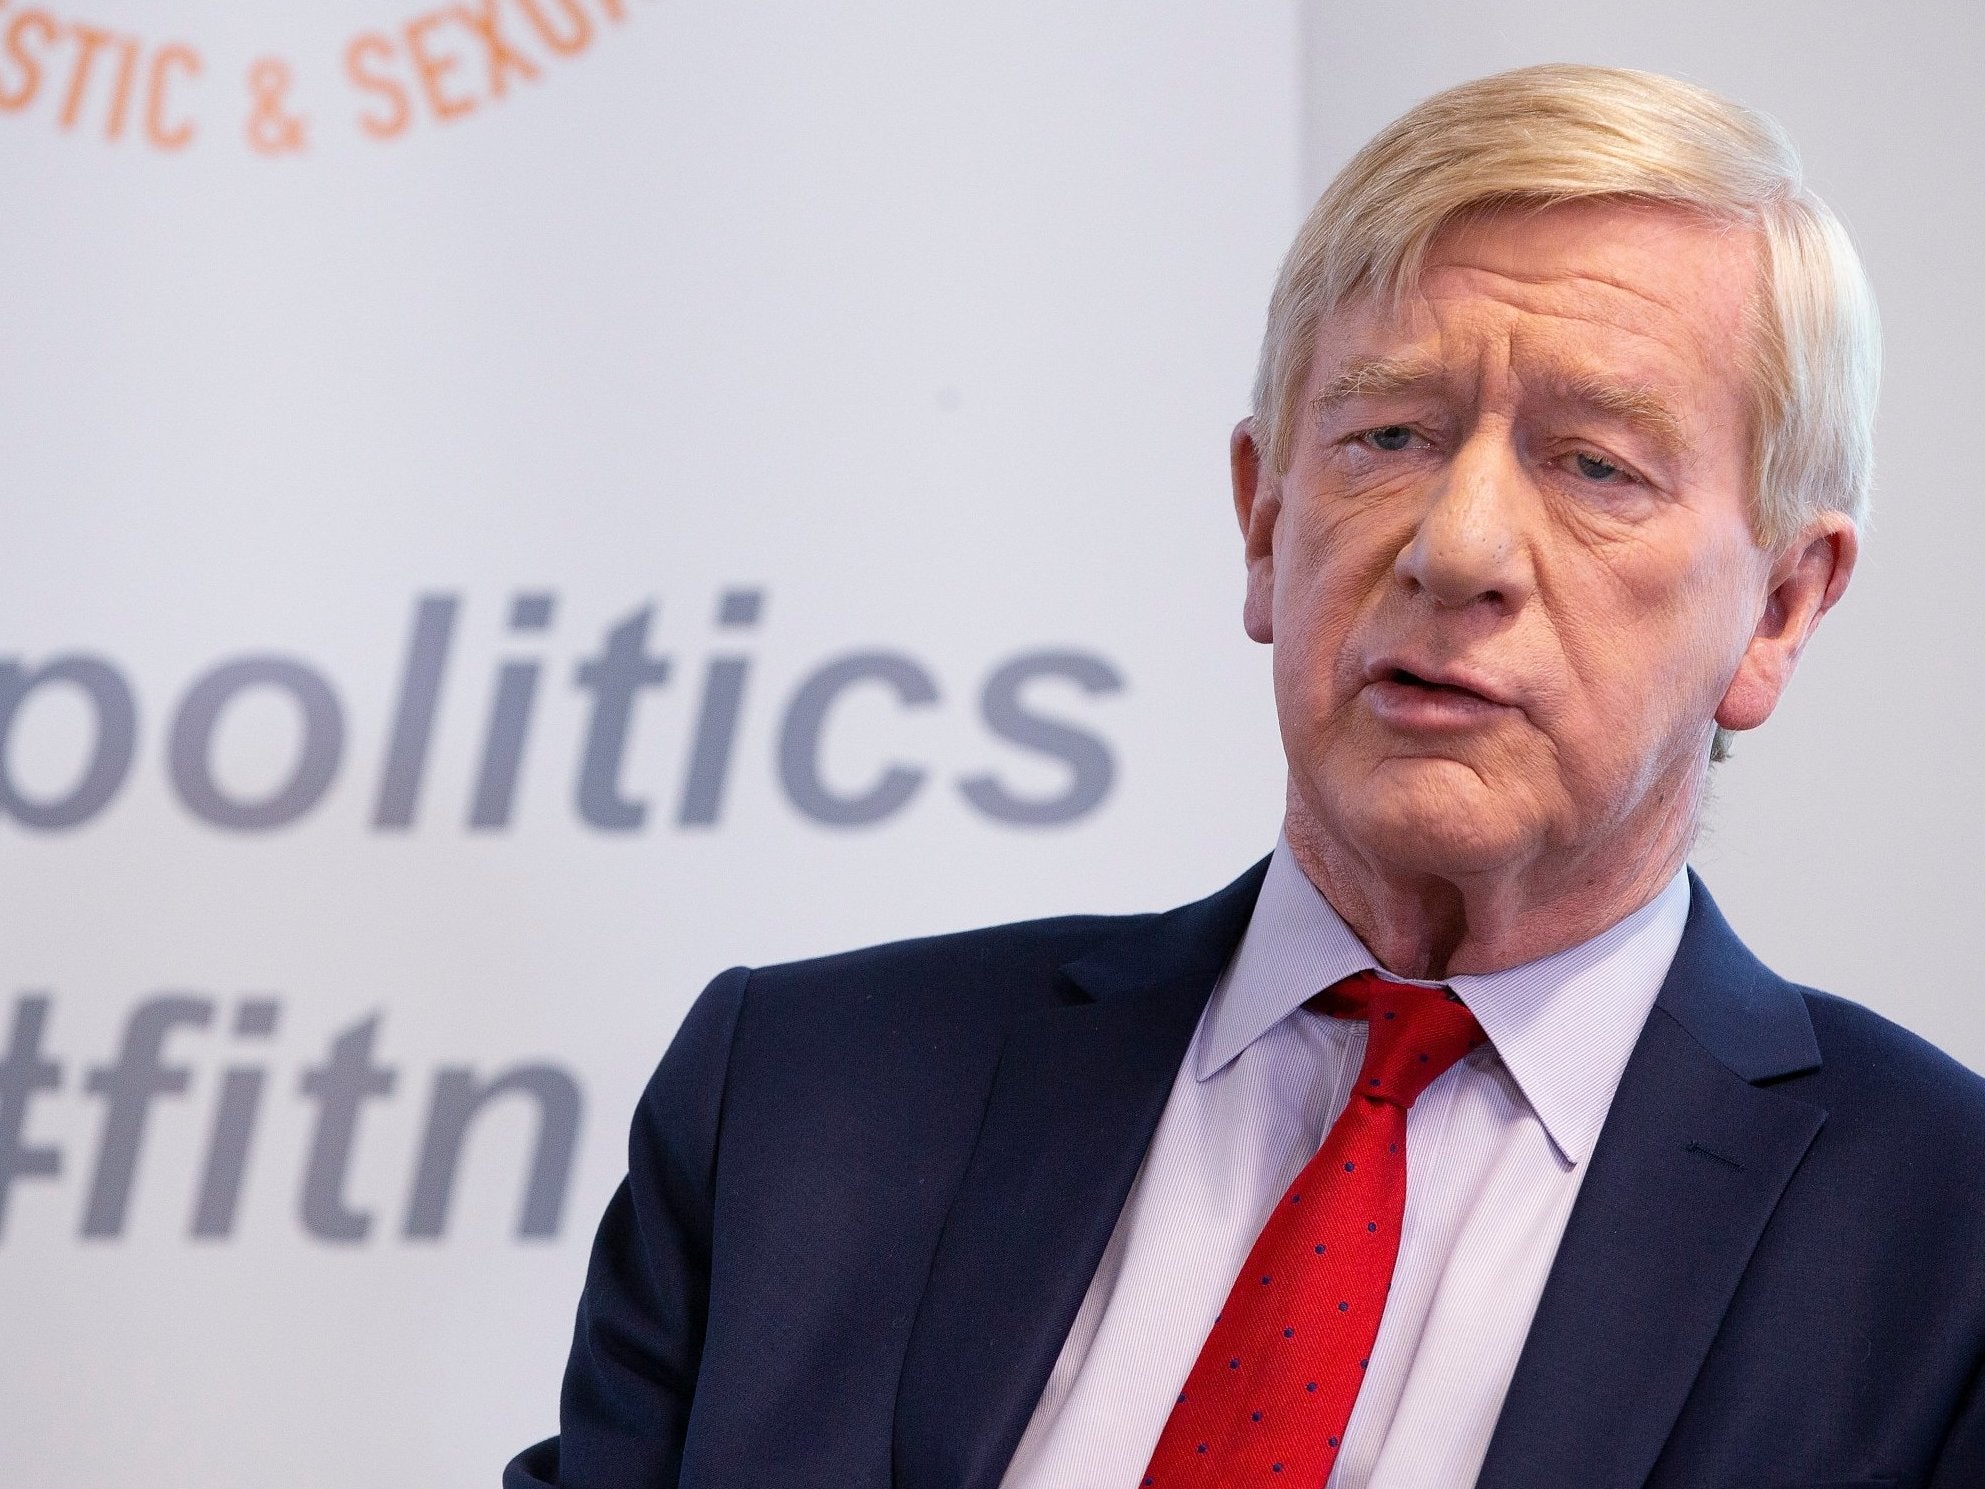 Bill Weld announced his candidacy for the Republicans this morning